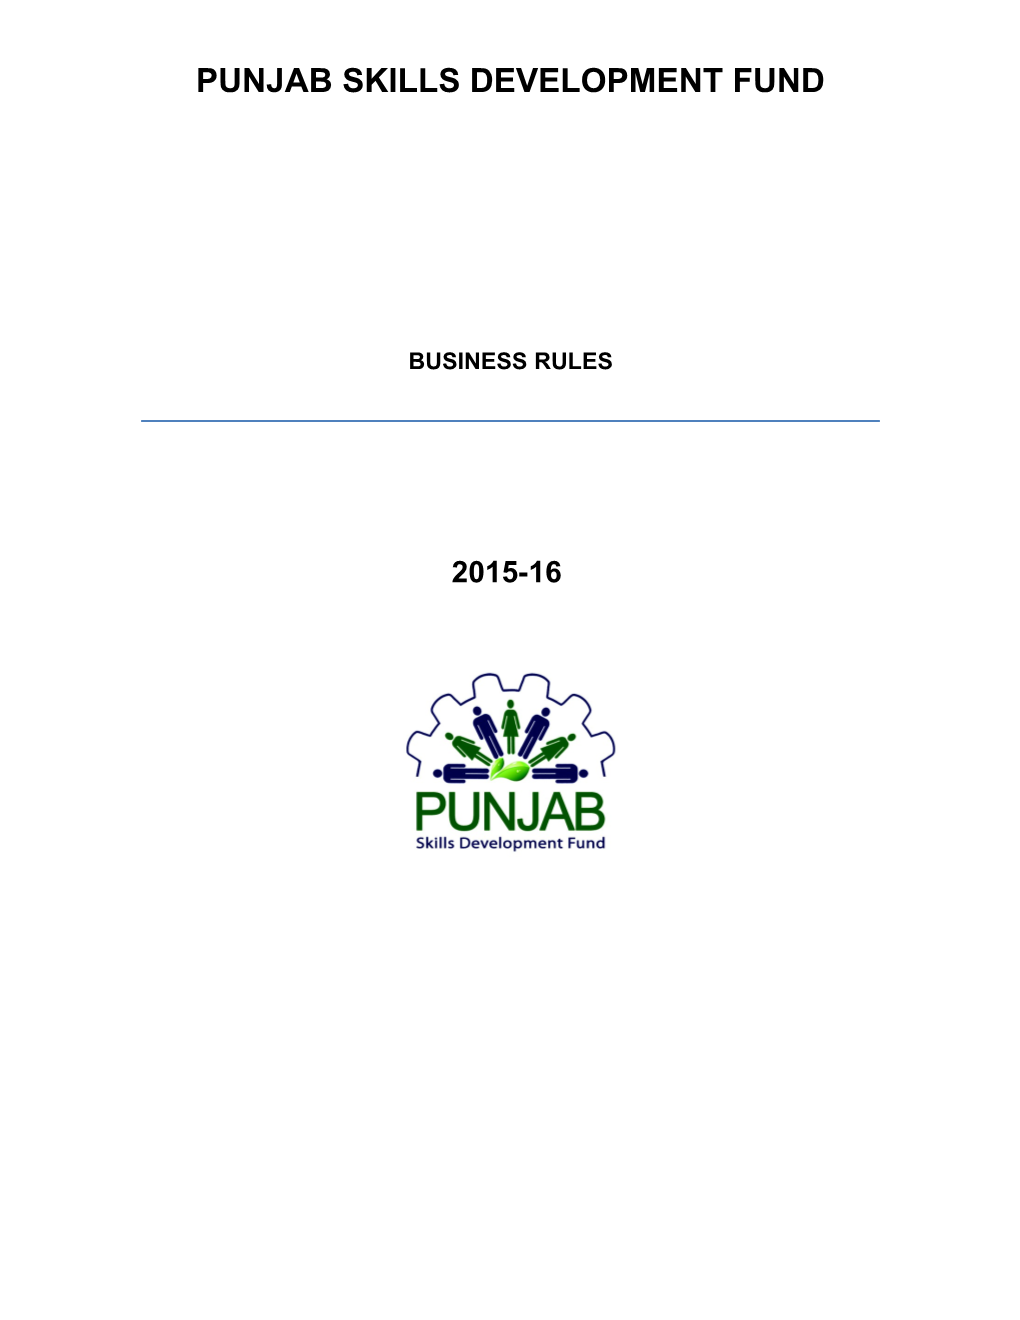 Business Rules, Reporting & Monitoring Manual for Training Service Providers